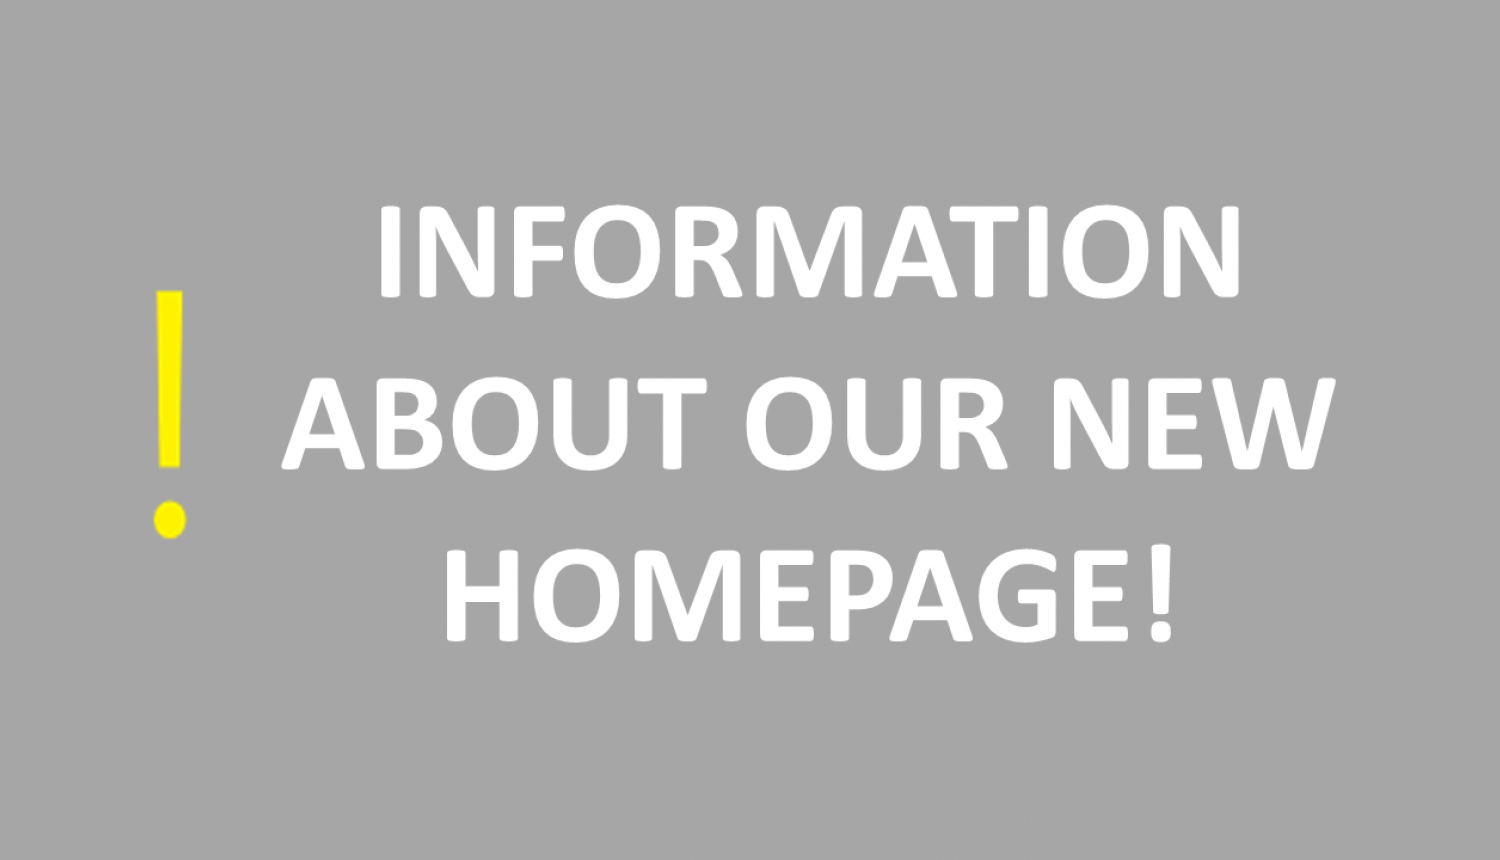 Information about our new homepage